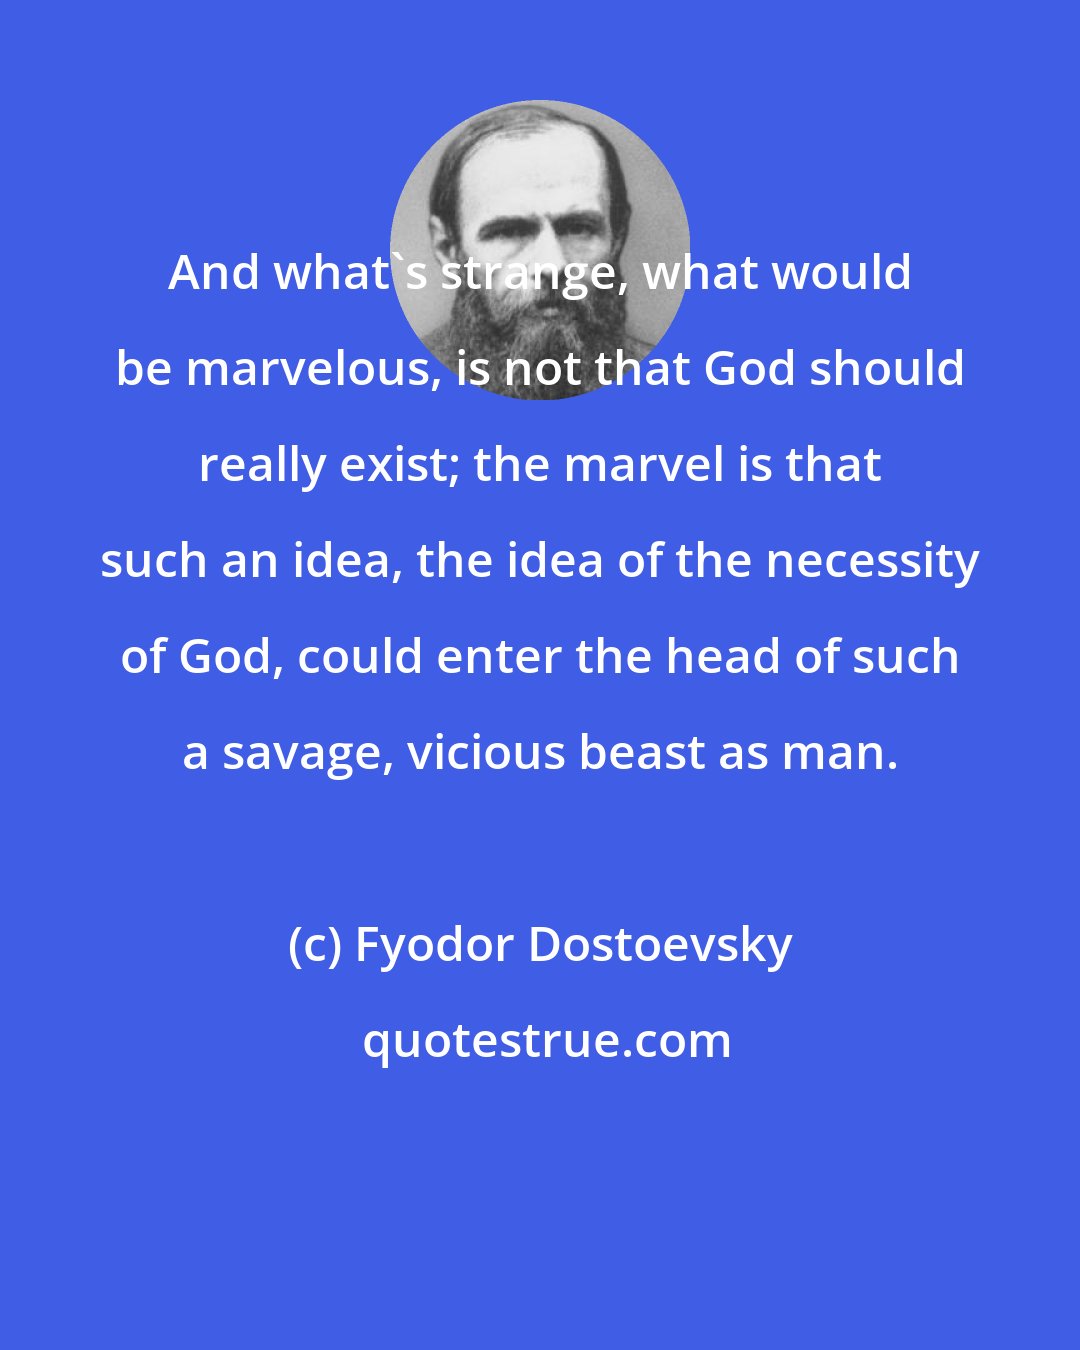 Fyodor Dostoevsky: And what's strange, what would be marvelous, is not that God should really exist; the marvel is that such an idea, the idea of the necessity of God, could enter the head of such a savage, vicious beast as man.